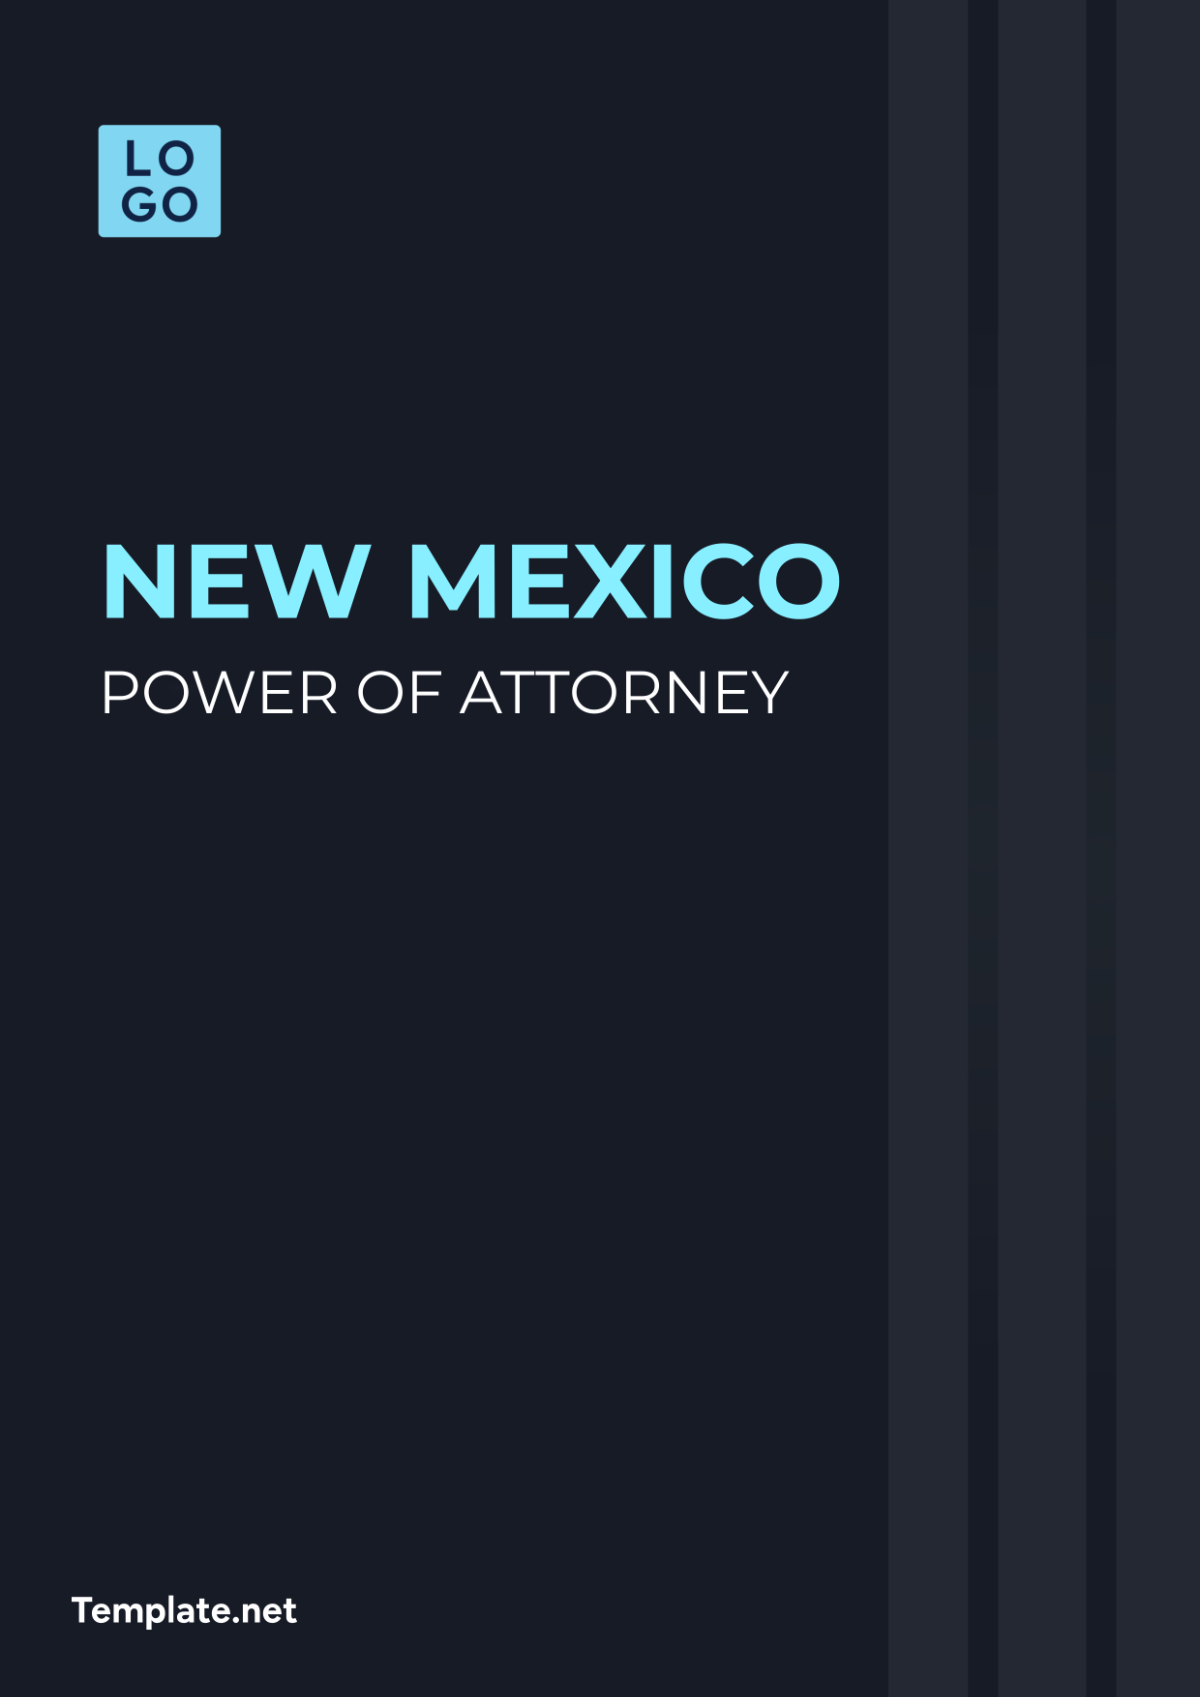 New Mexico Power of Attorney Template